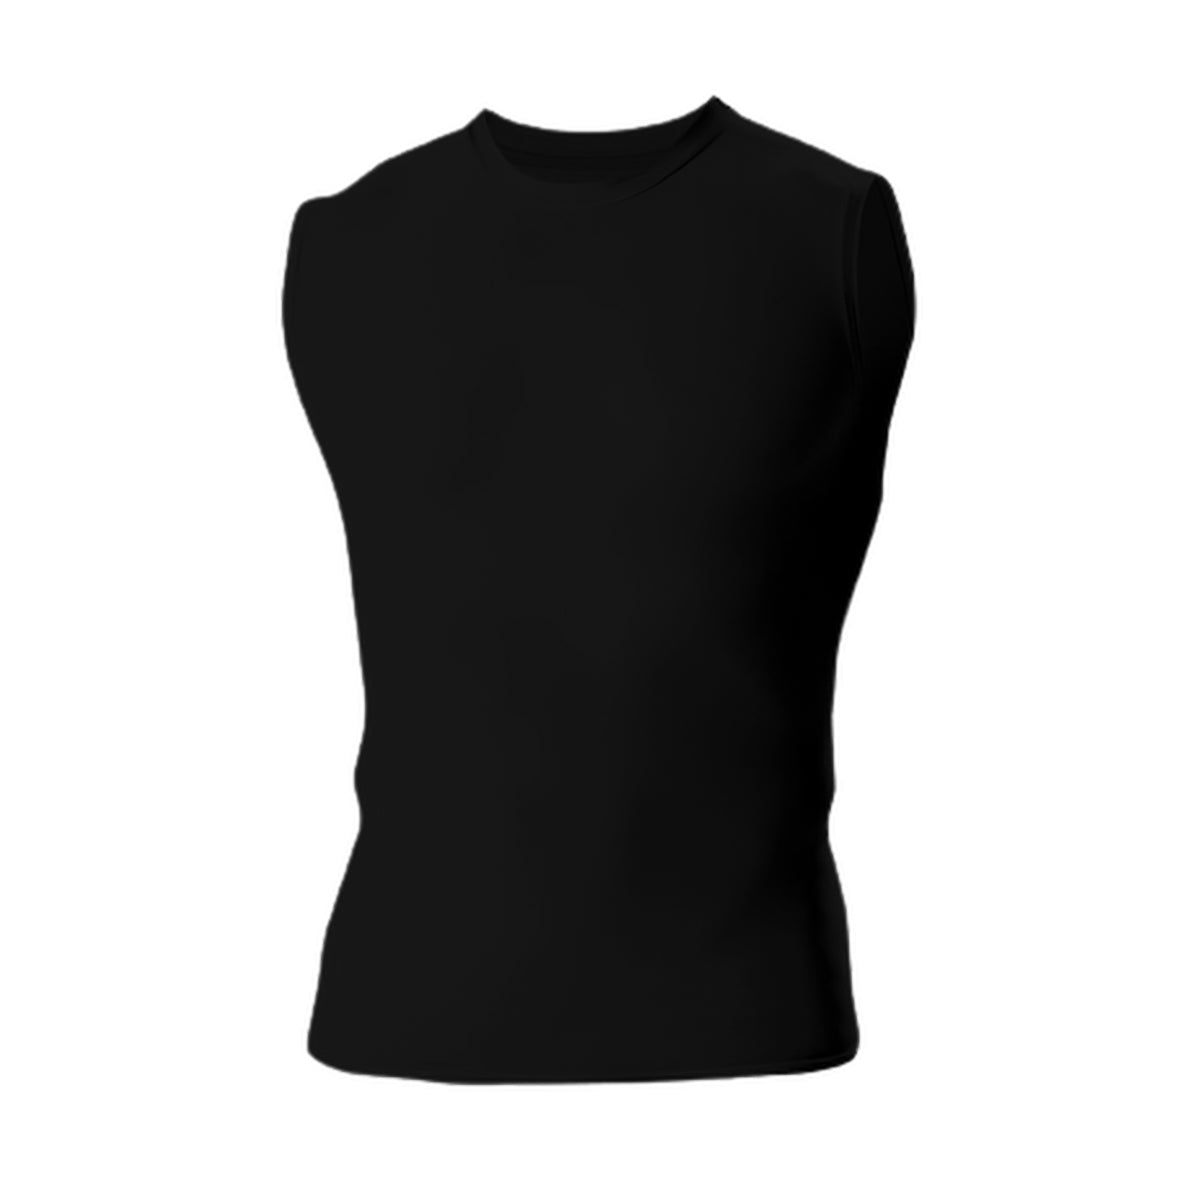 HercShirt 3.0 Max - The World's Cleanest Tank Top